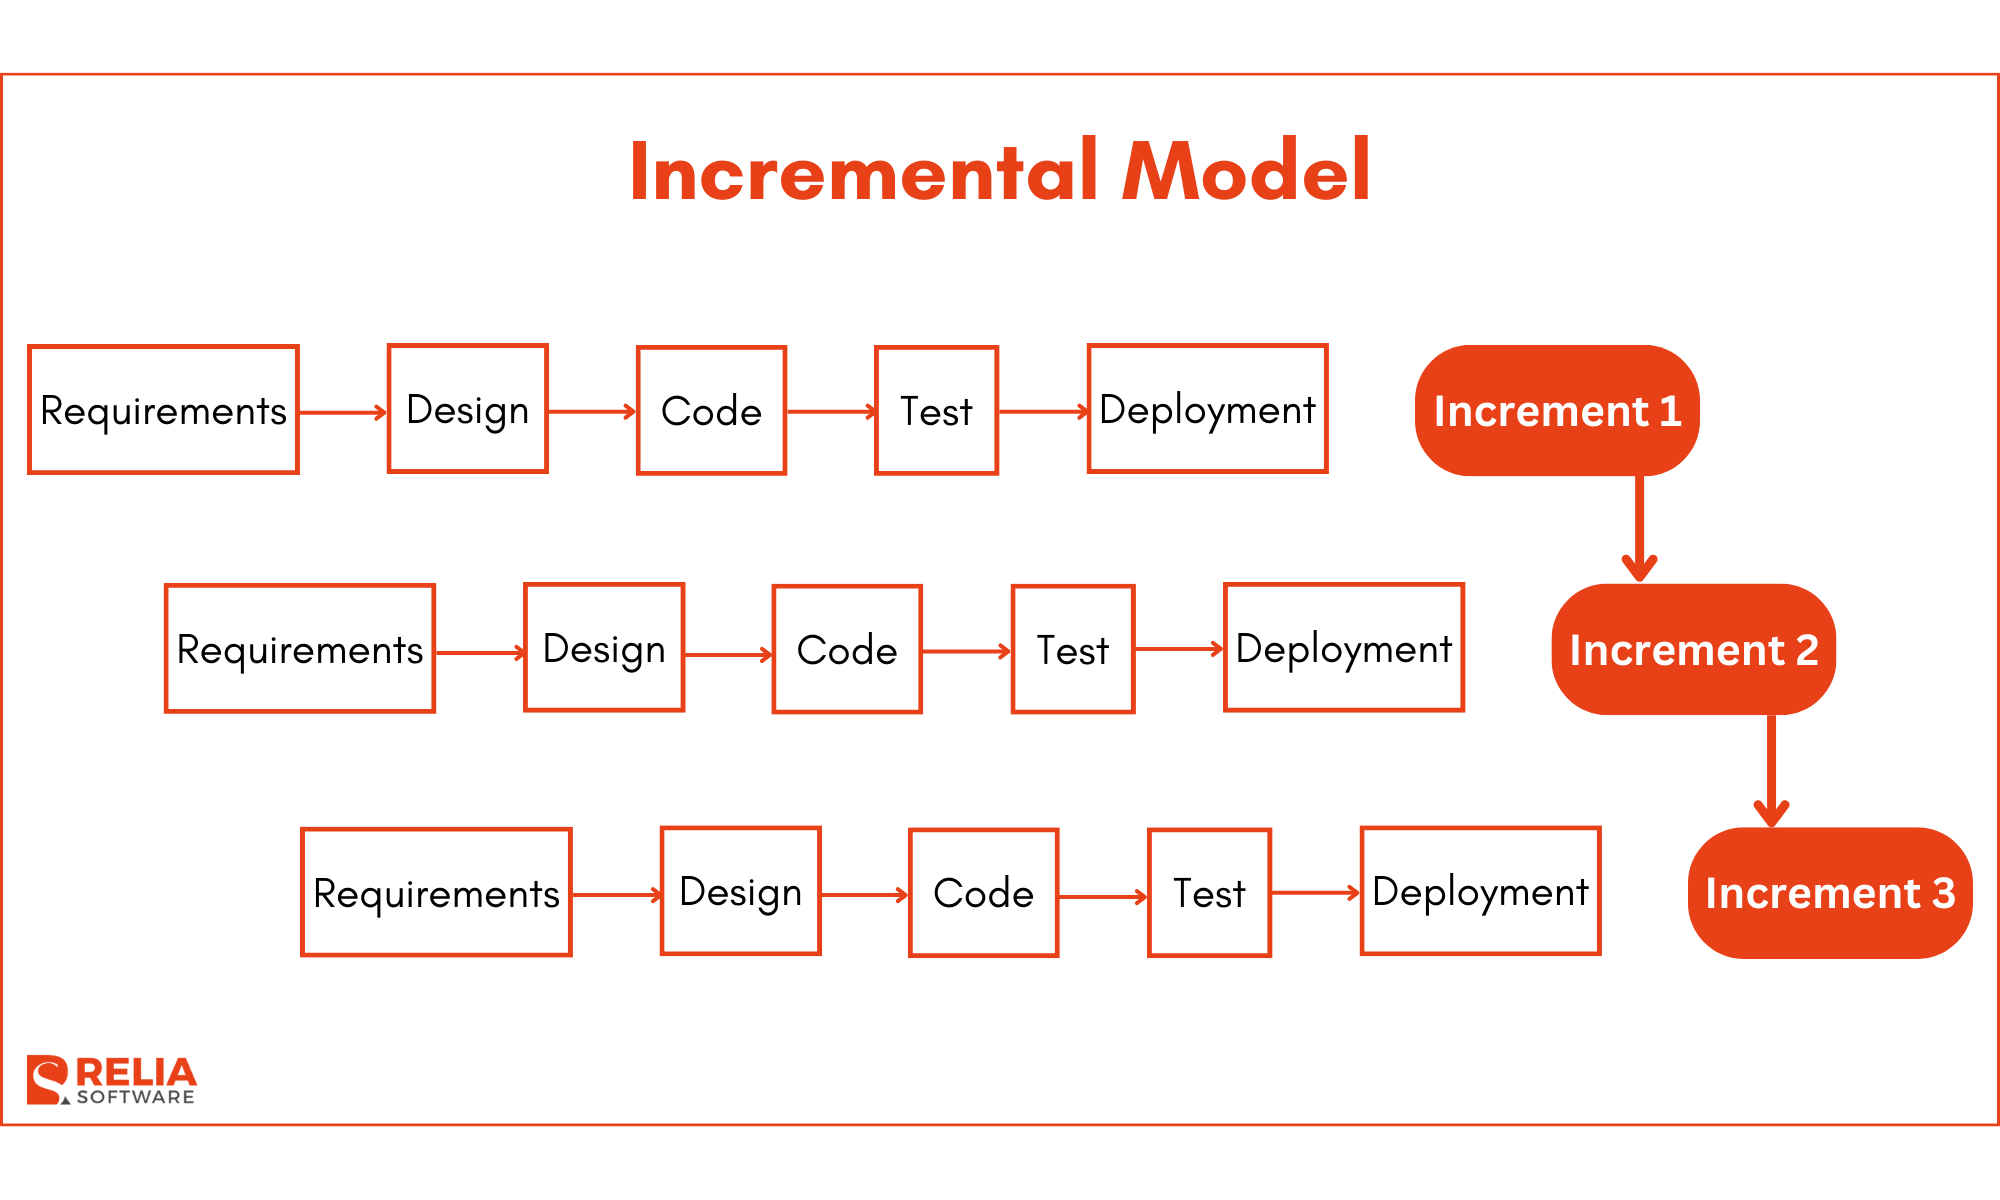 The Incremental Model is well-suited for projects with clearly defined functionalities and phased deployment needs.